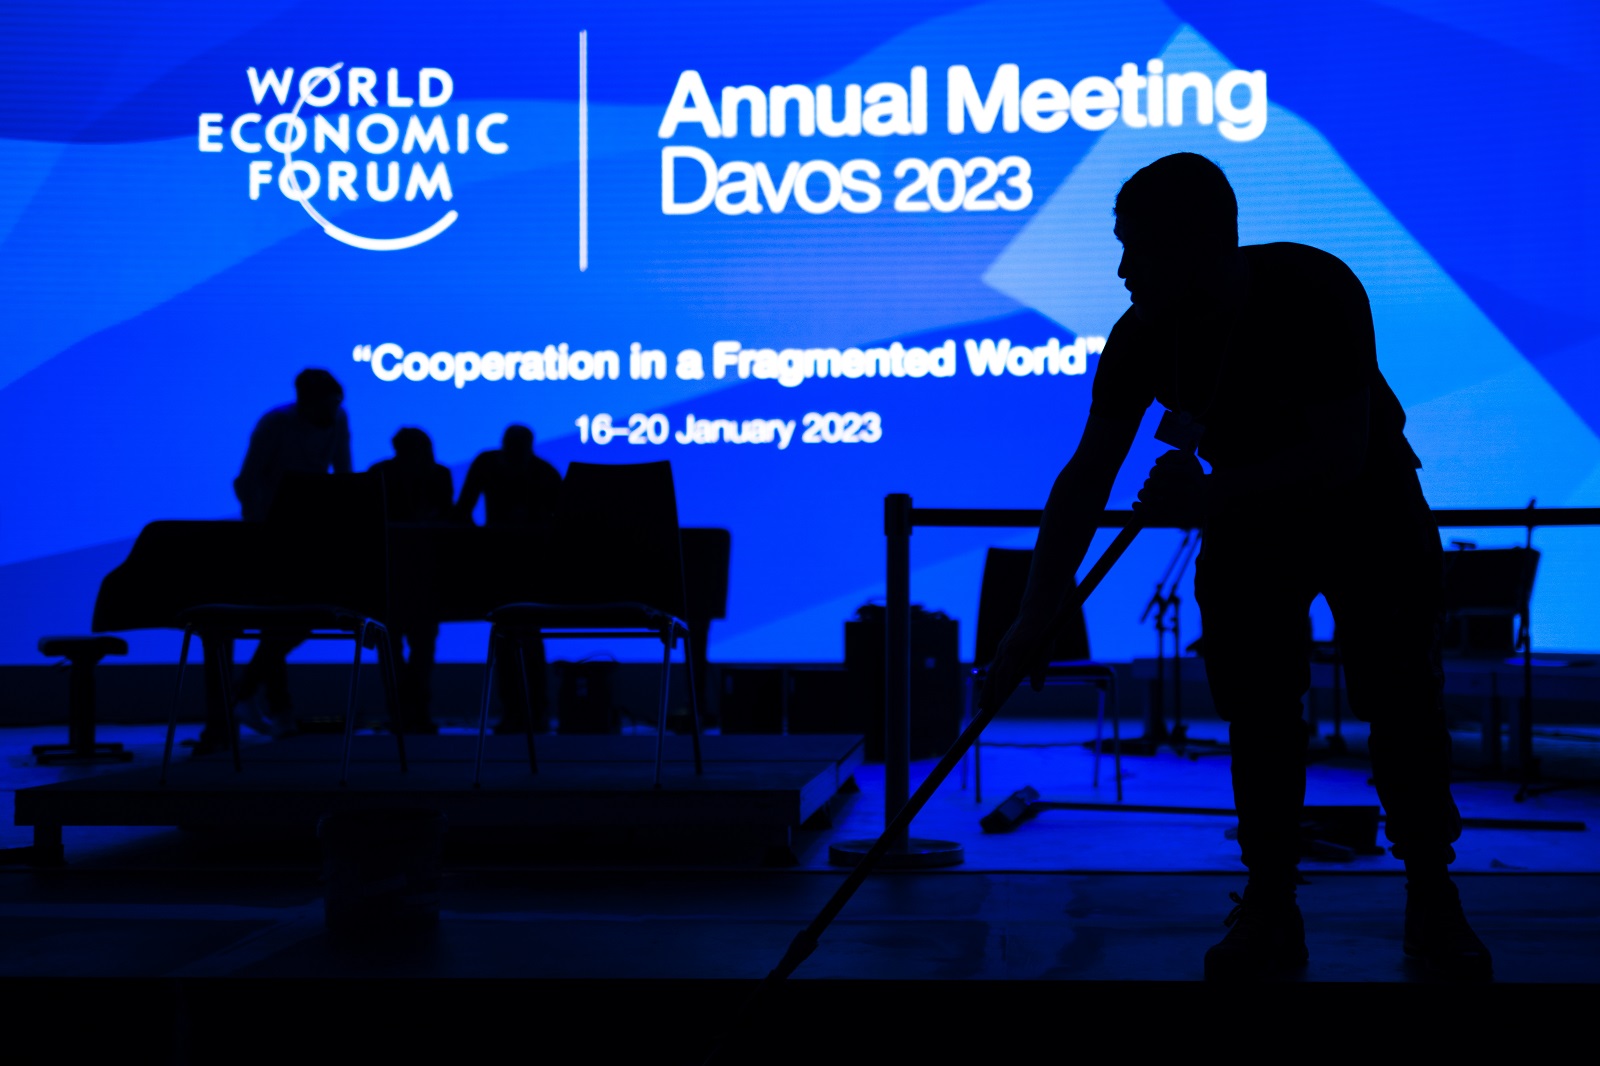 epa10406532 Workers set the main stage on the eve of the 52nd annual meeting of the World Economic Forum (WEF) in Davos, Switzerland, 15 January 2023. The meeting brings together entrepreneurs, scientists, corporate and political leaders in Davos under the topic 'Cooperation in a Fragmented World' from 16 to 20 January.  EPA/GIAN EHRENZELLER